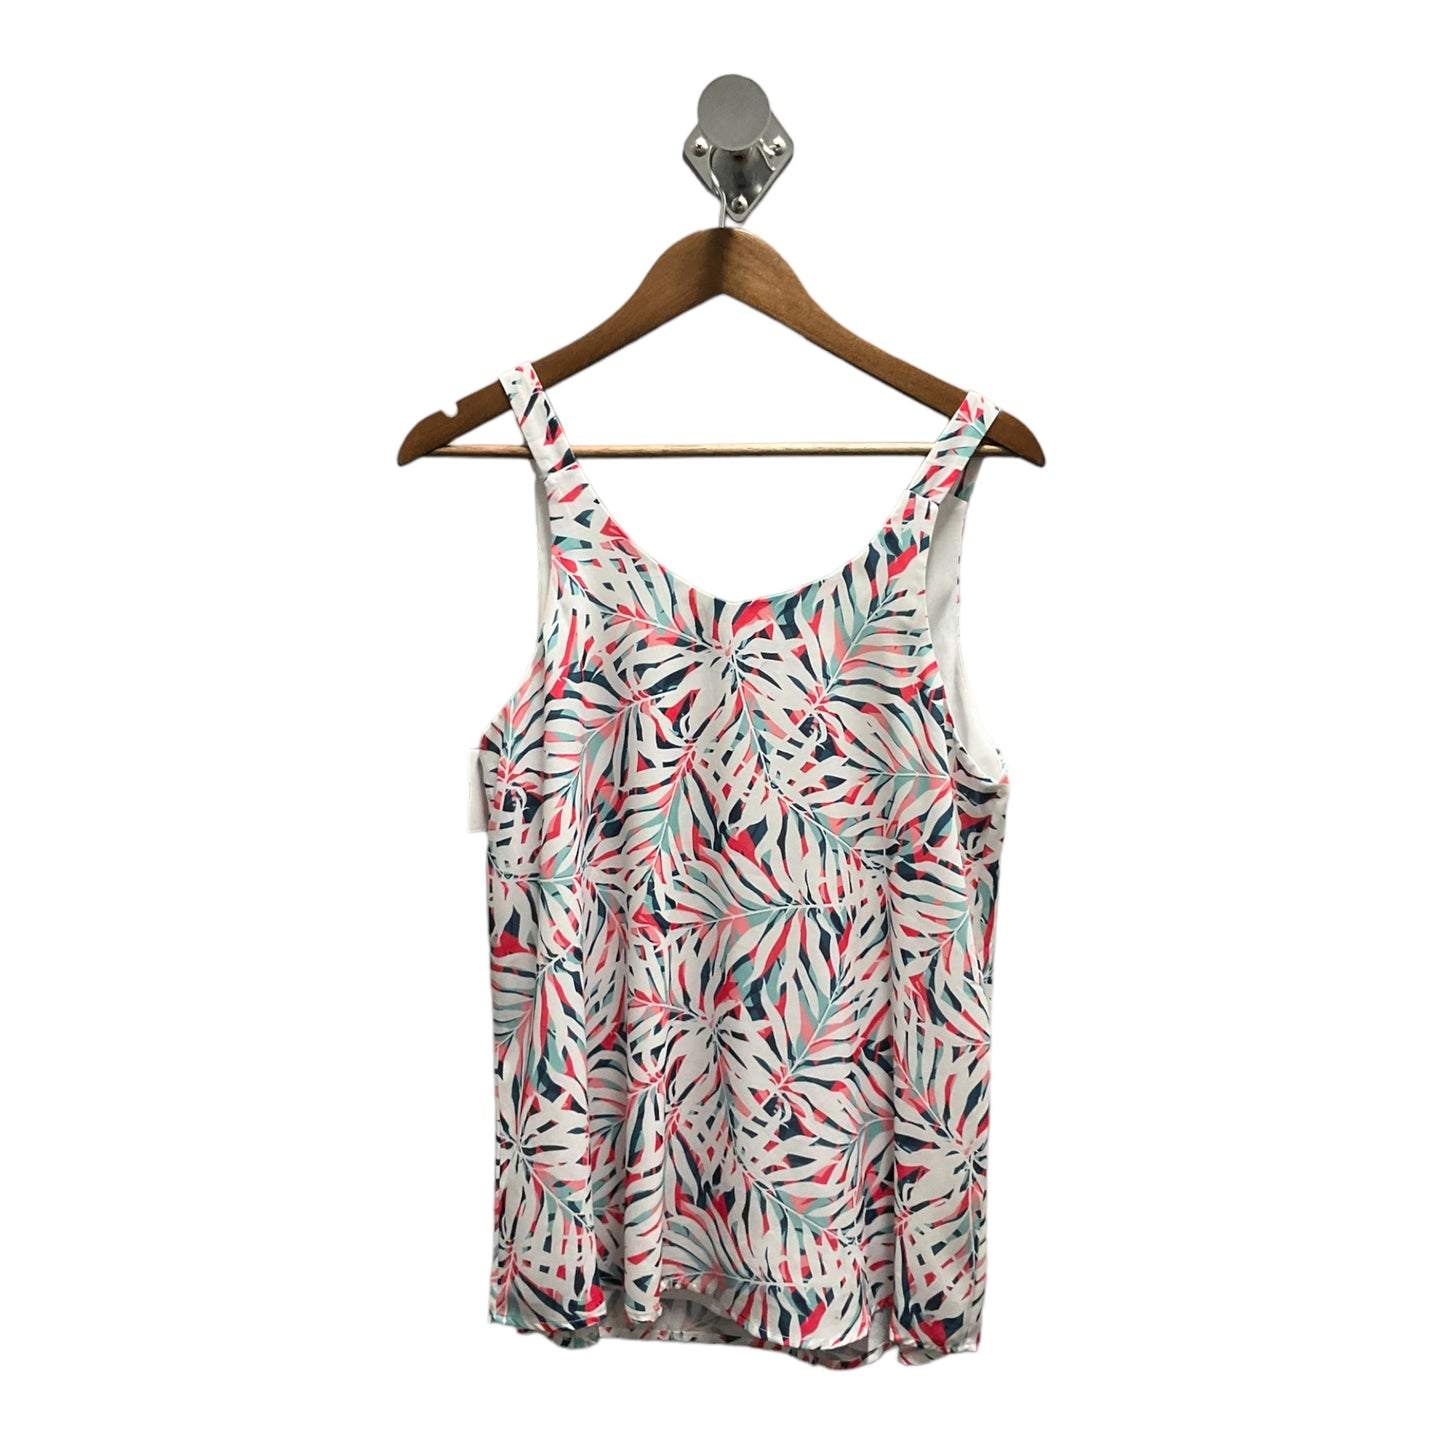 Top Sleeveless By Hawthorn  Size: M